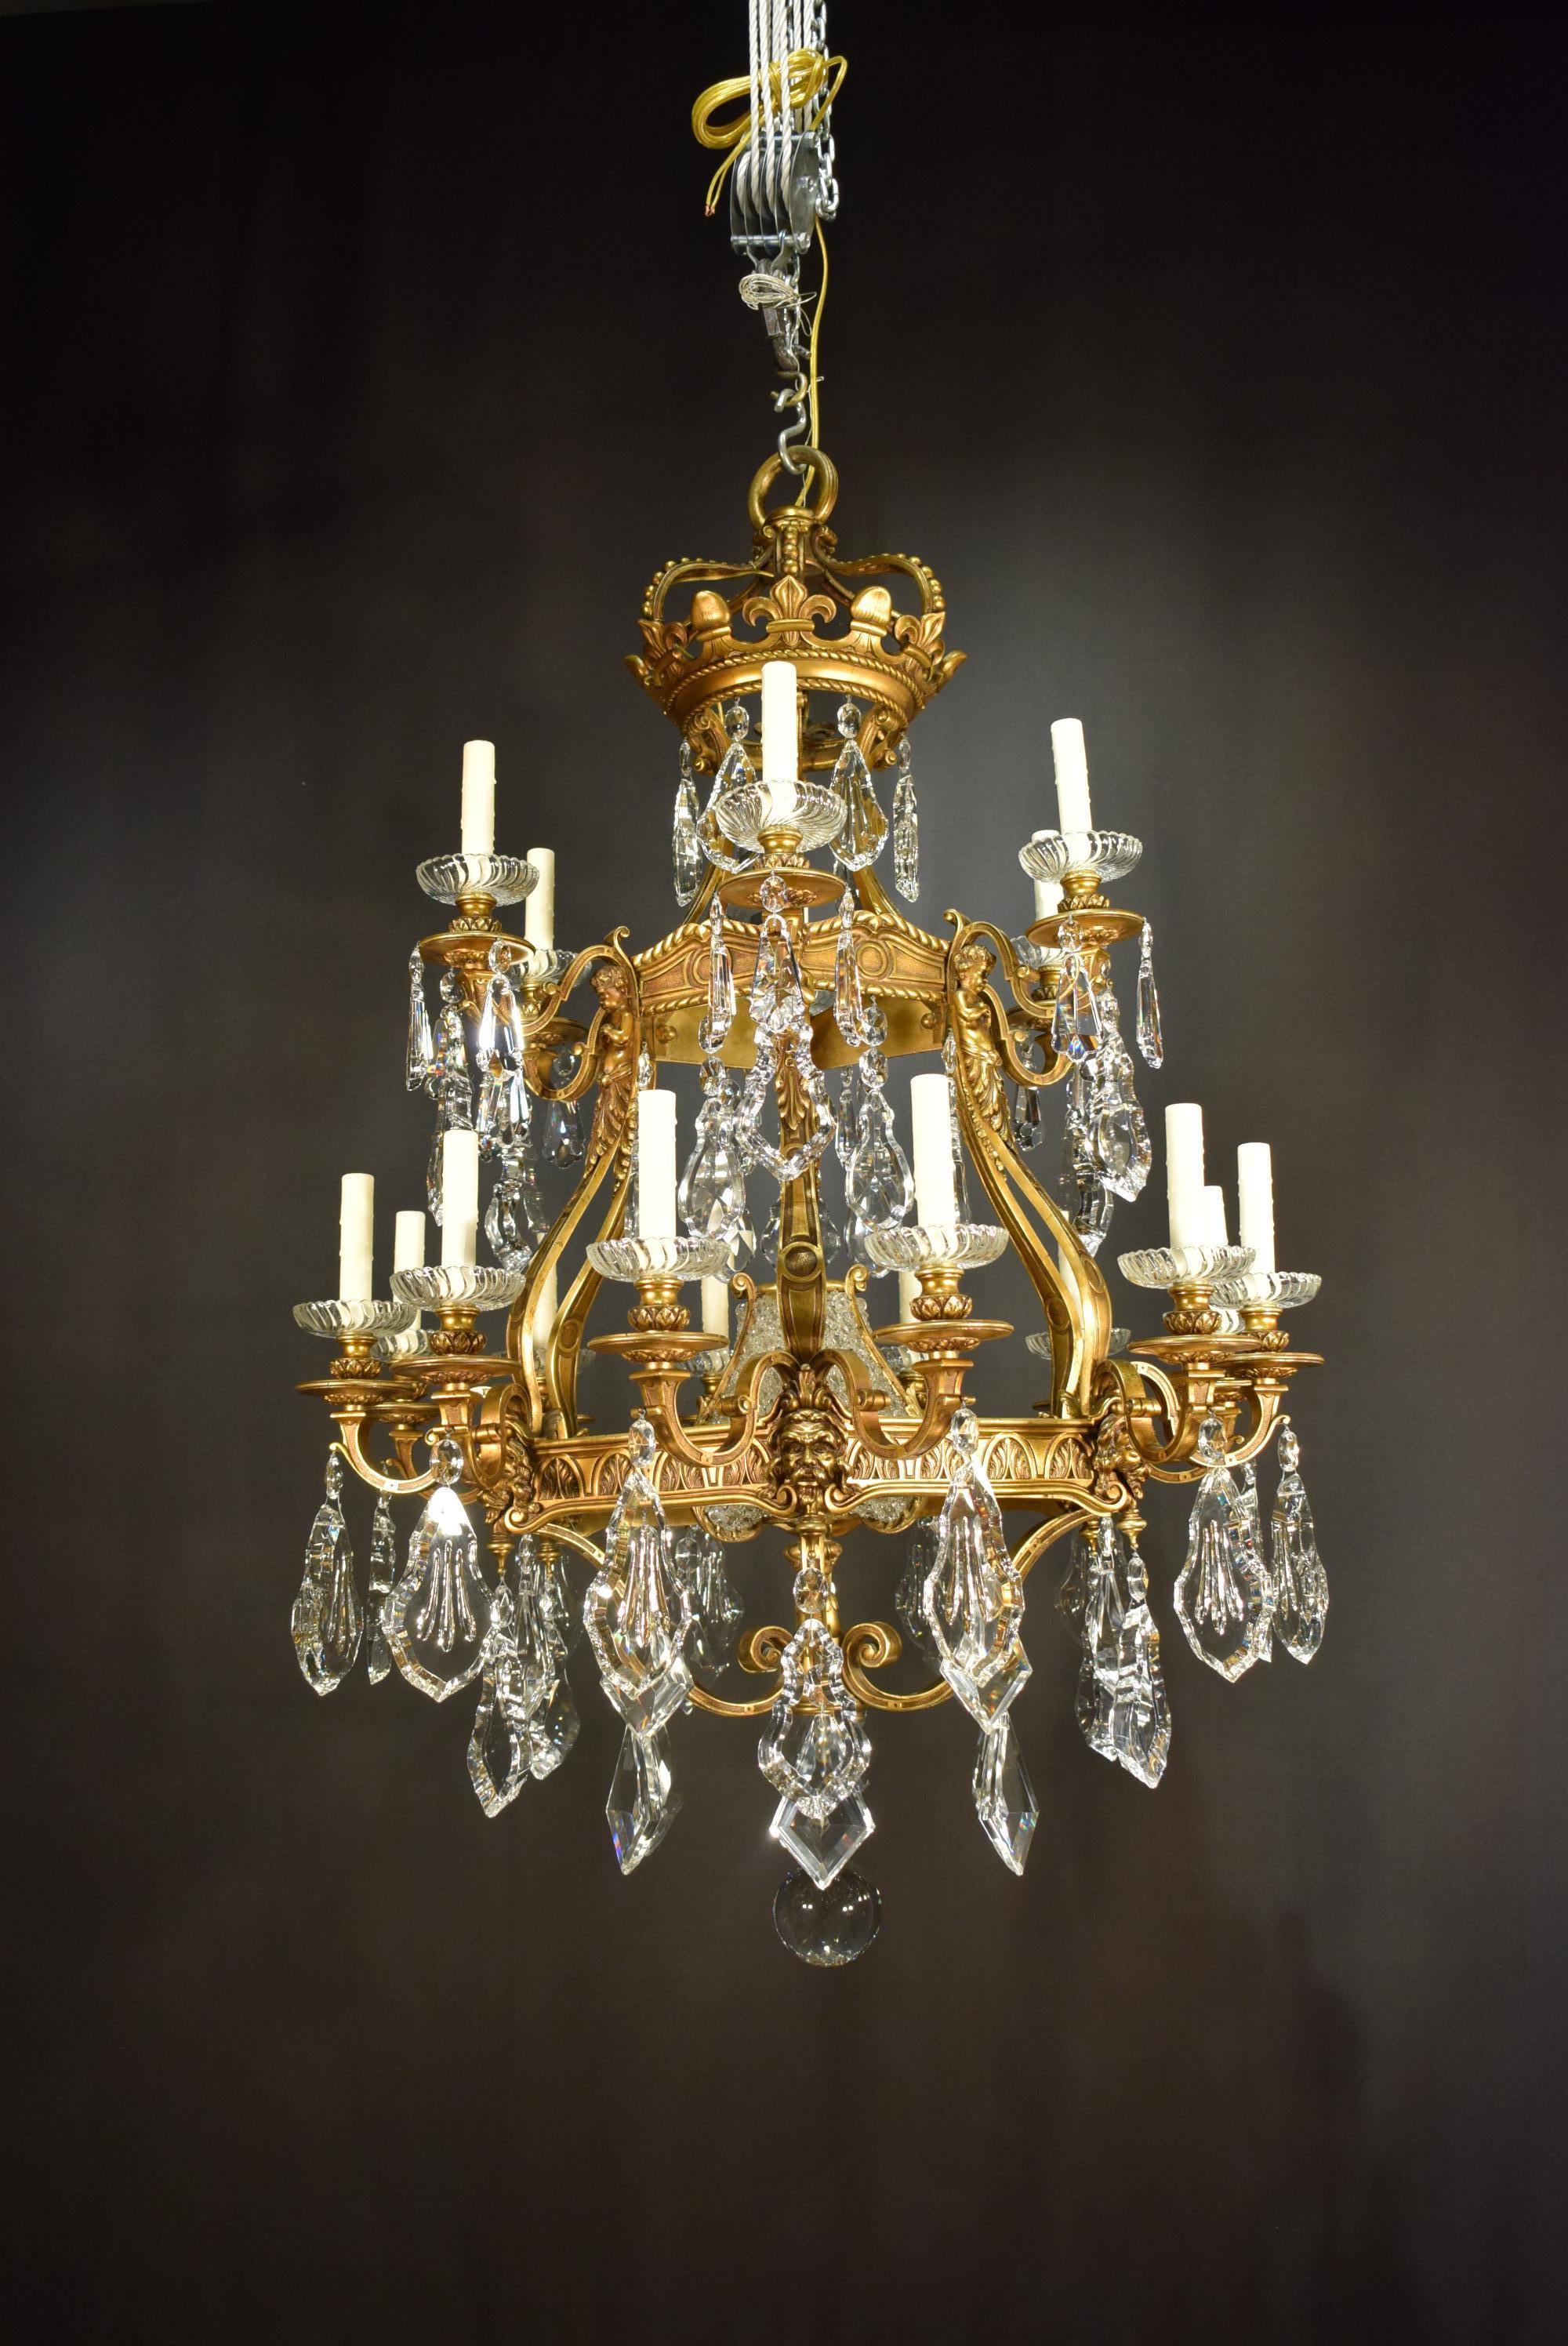 A magnificent gilt bronze and crystal chandelier, France, circa 1900.
Measures: Height 52 x diameter 36. 19 lights. CW4556